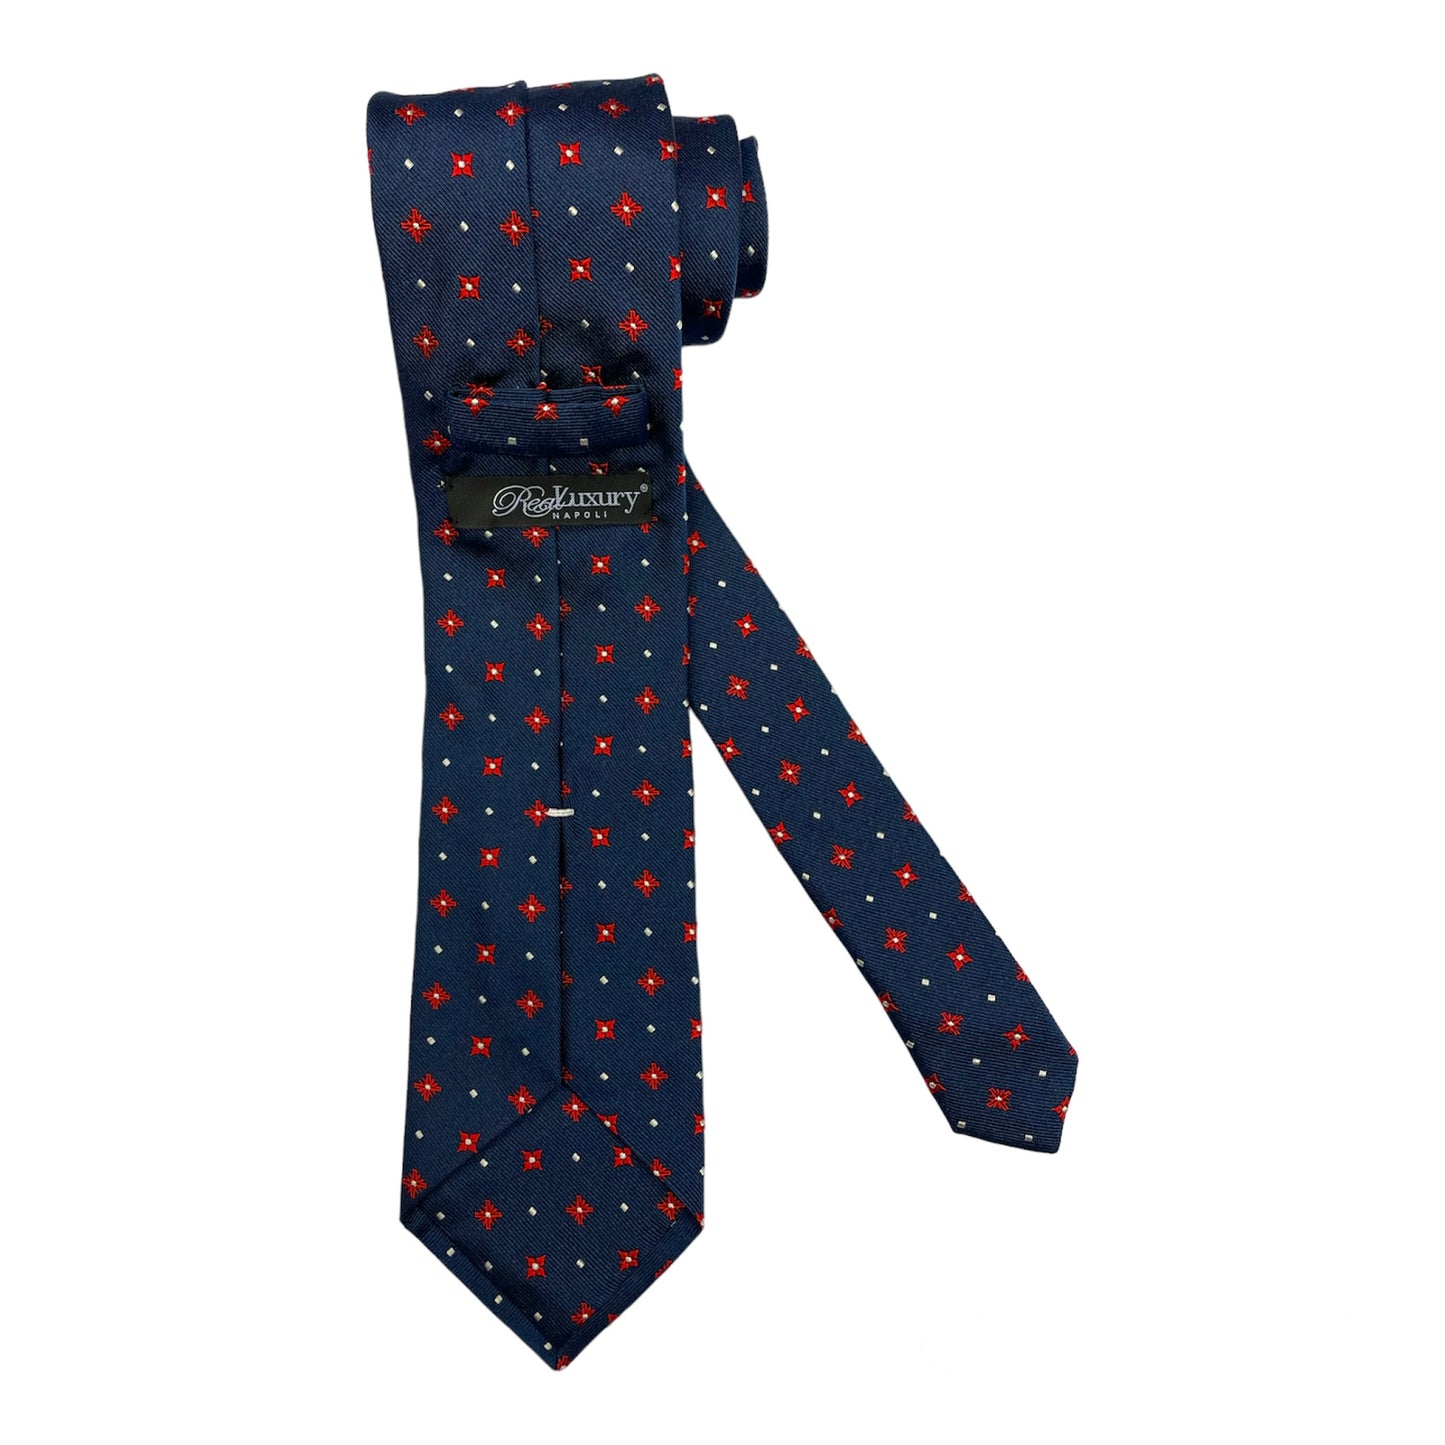 Blue silk tie with red flower and white dots